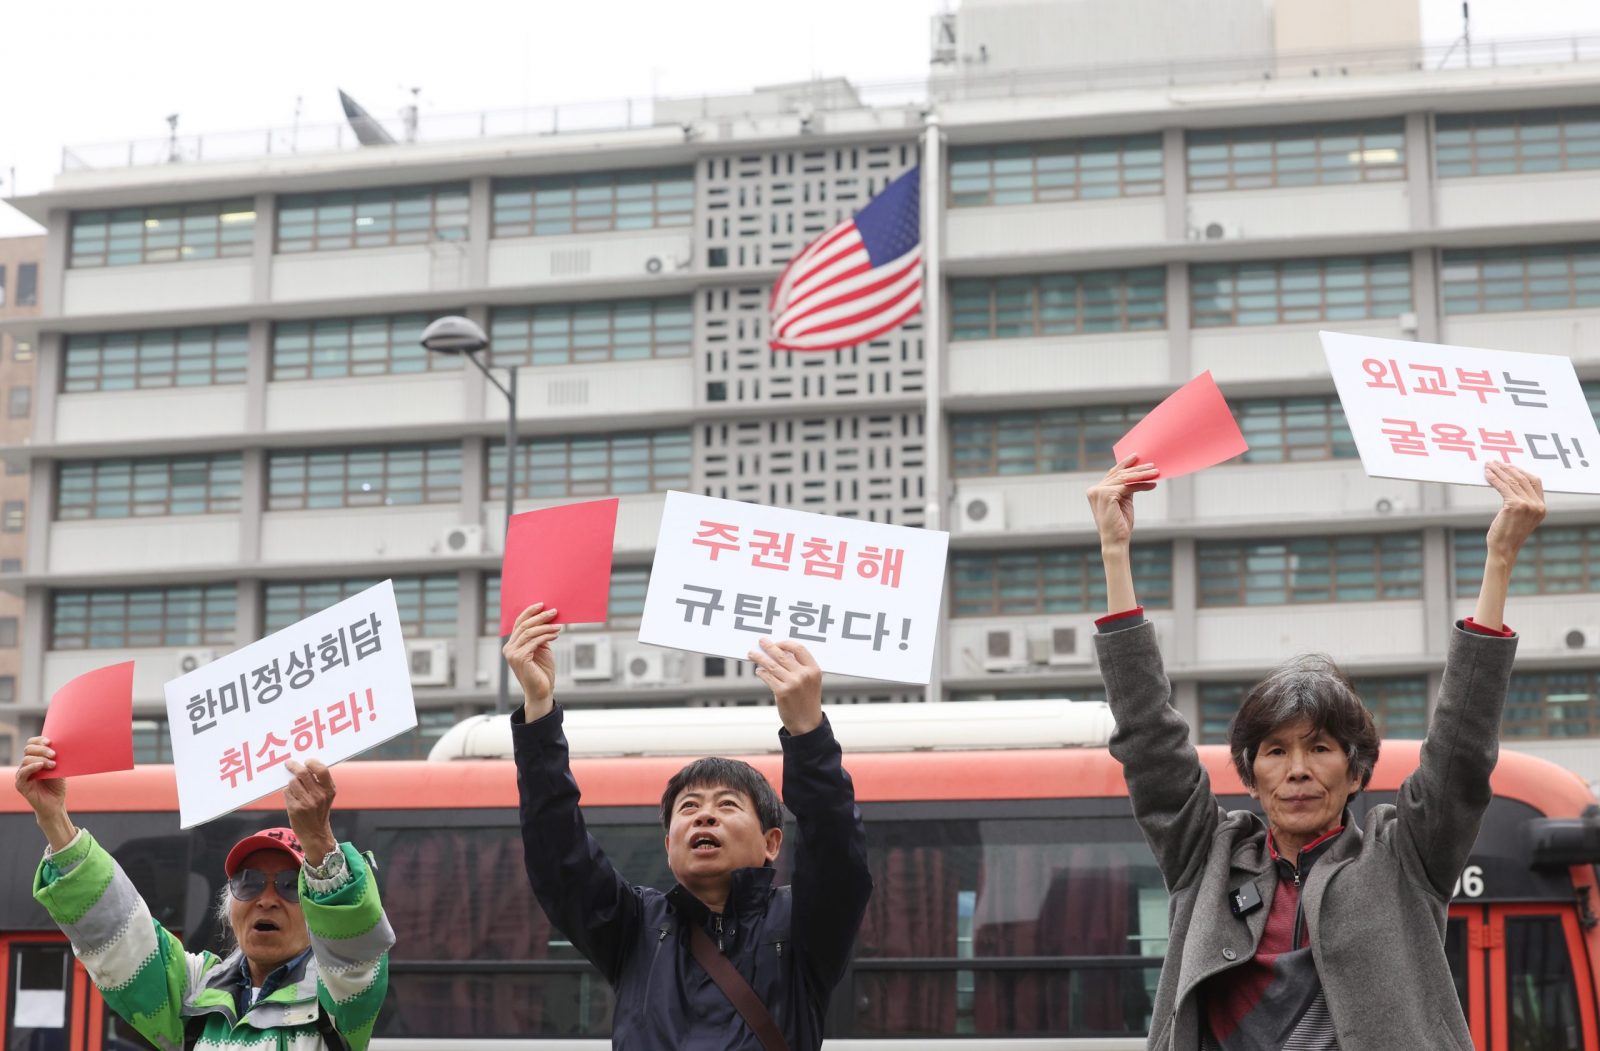 epa10568020 Members of a civic group show red cards during a rally near the US Embassy in Seoul, South Korea, 11 April 2023, to urge the United States to issue an apology for its alleged attempts to eavesdrop on top South Korean officials.  EPA/YONHAP SOUTH KOREA OUT